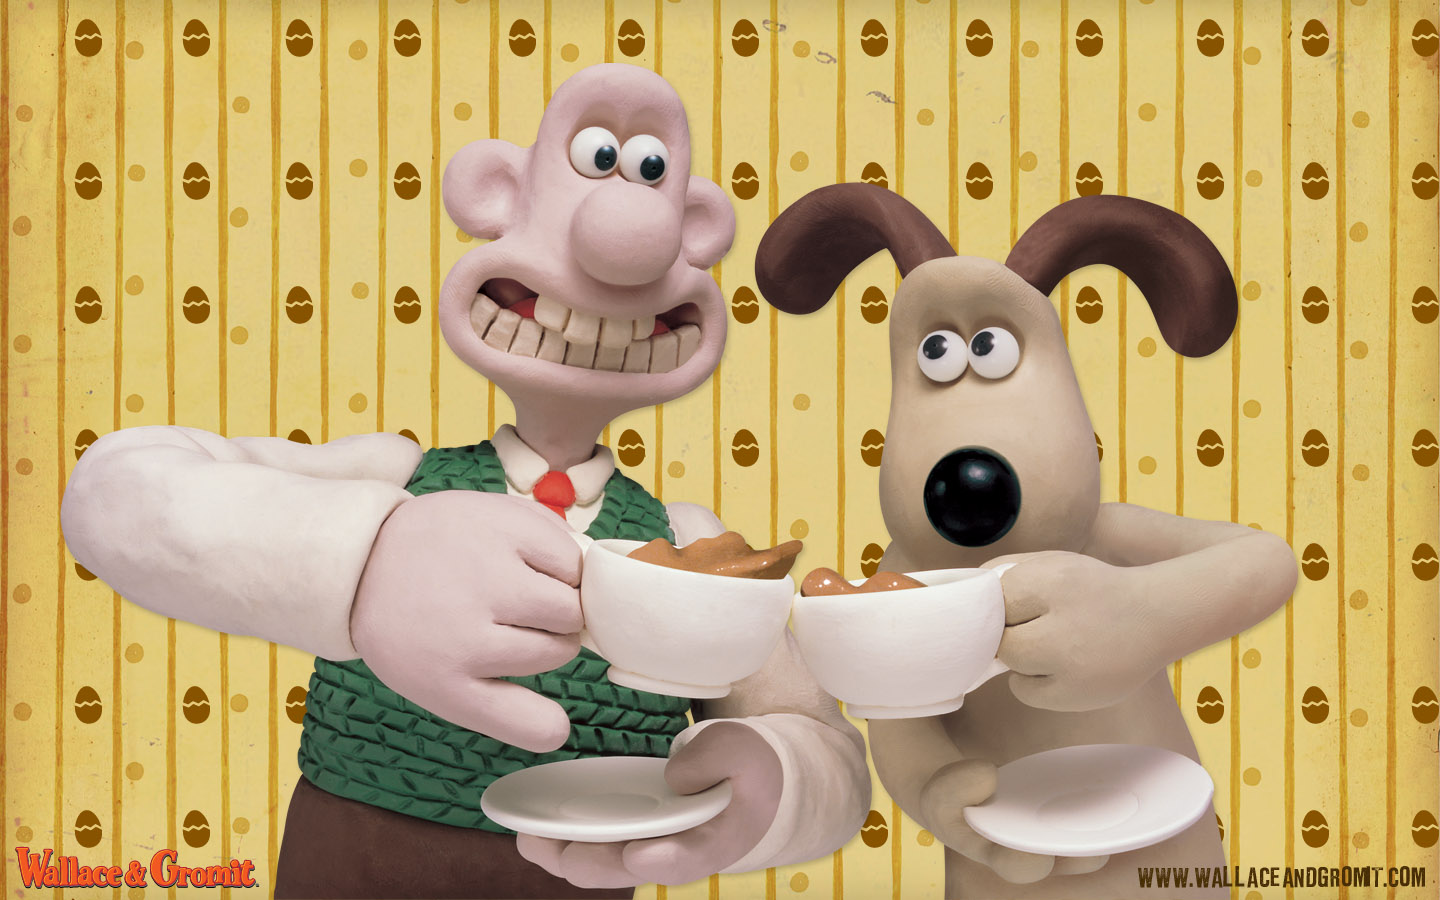 Free download wallace and gromit geekery Pinterest [1440x900] for your